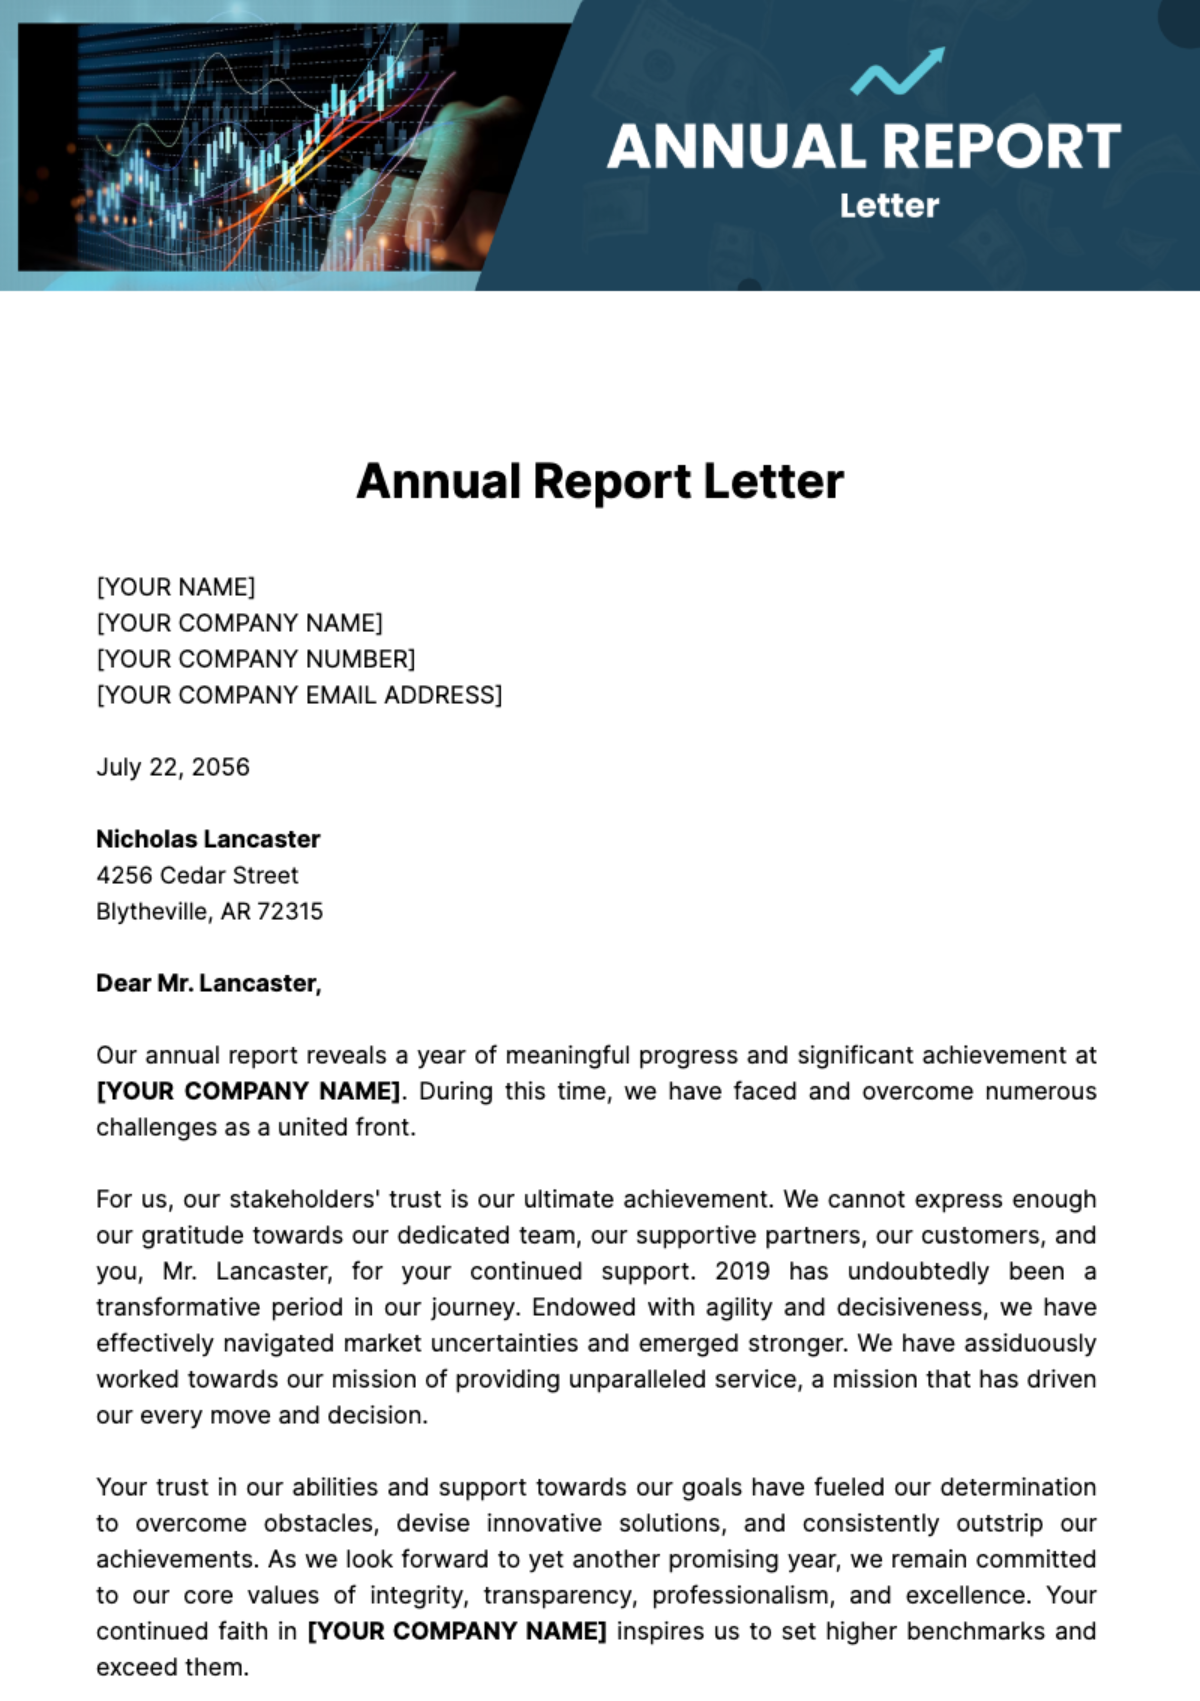 Annual Report Letter Template